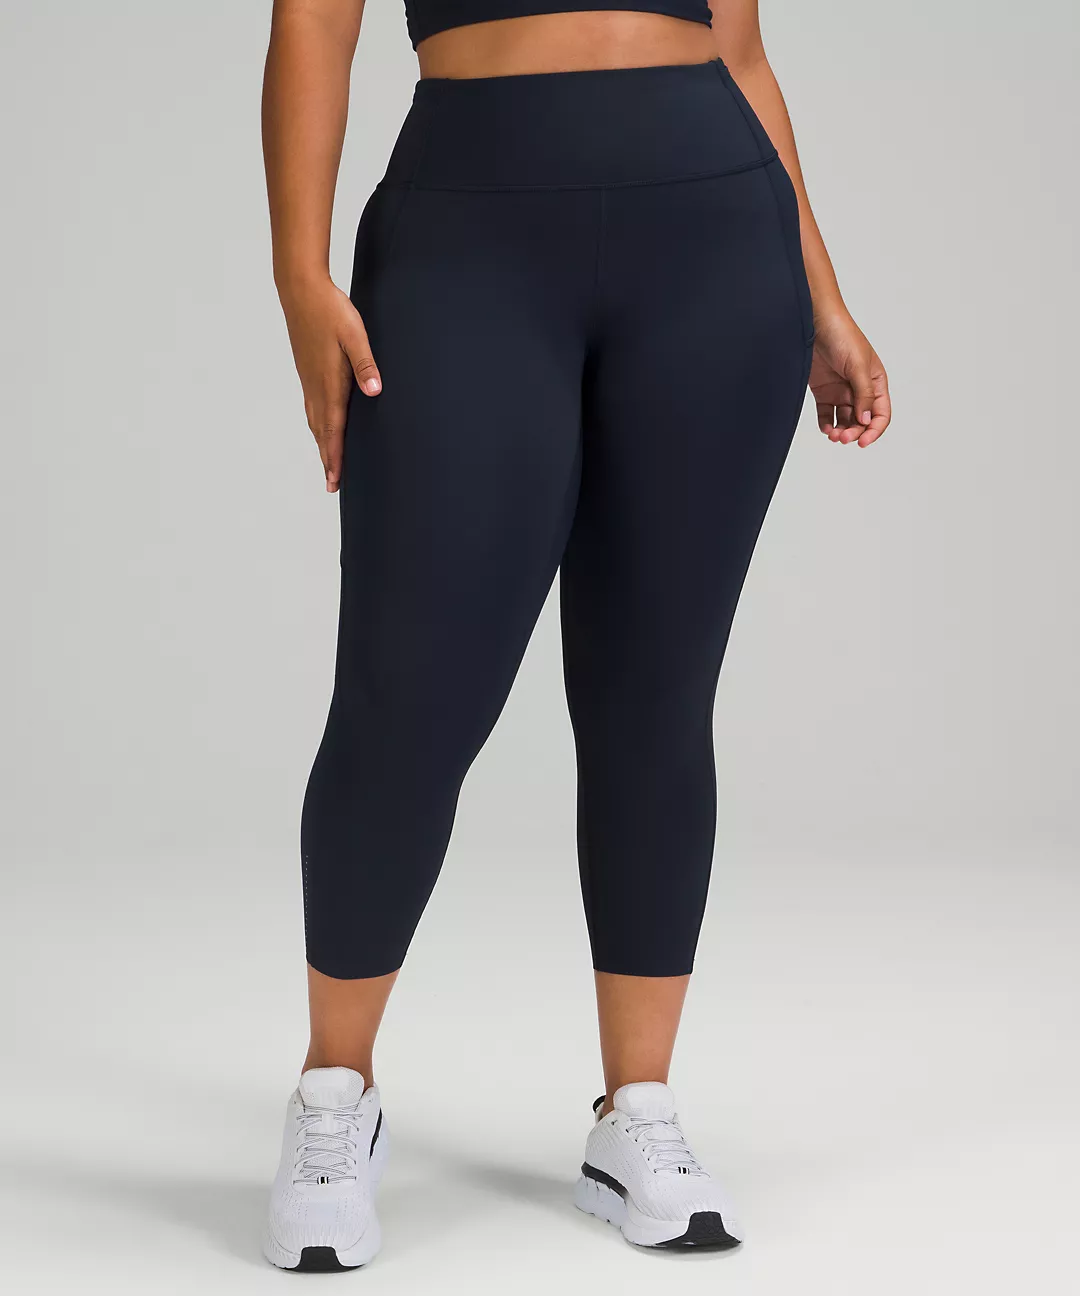 A lululemon Fast and Free Reflective High-Rise Crop 23"